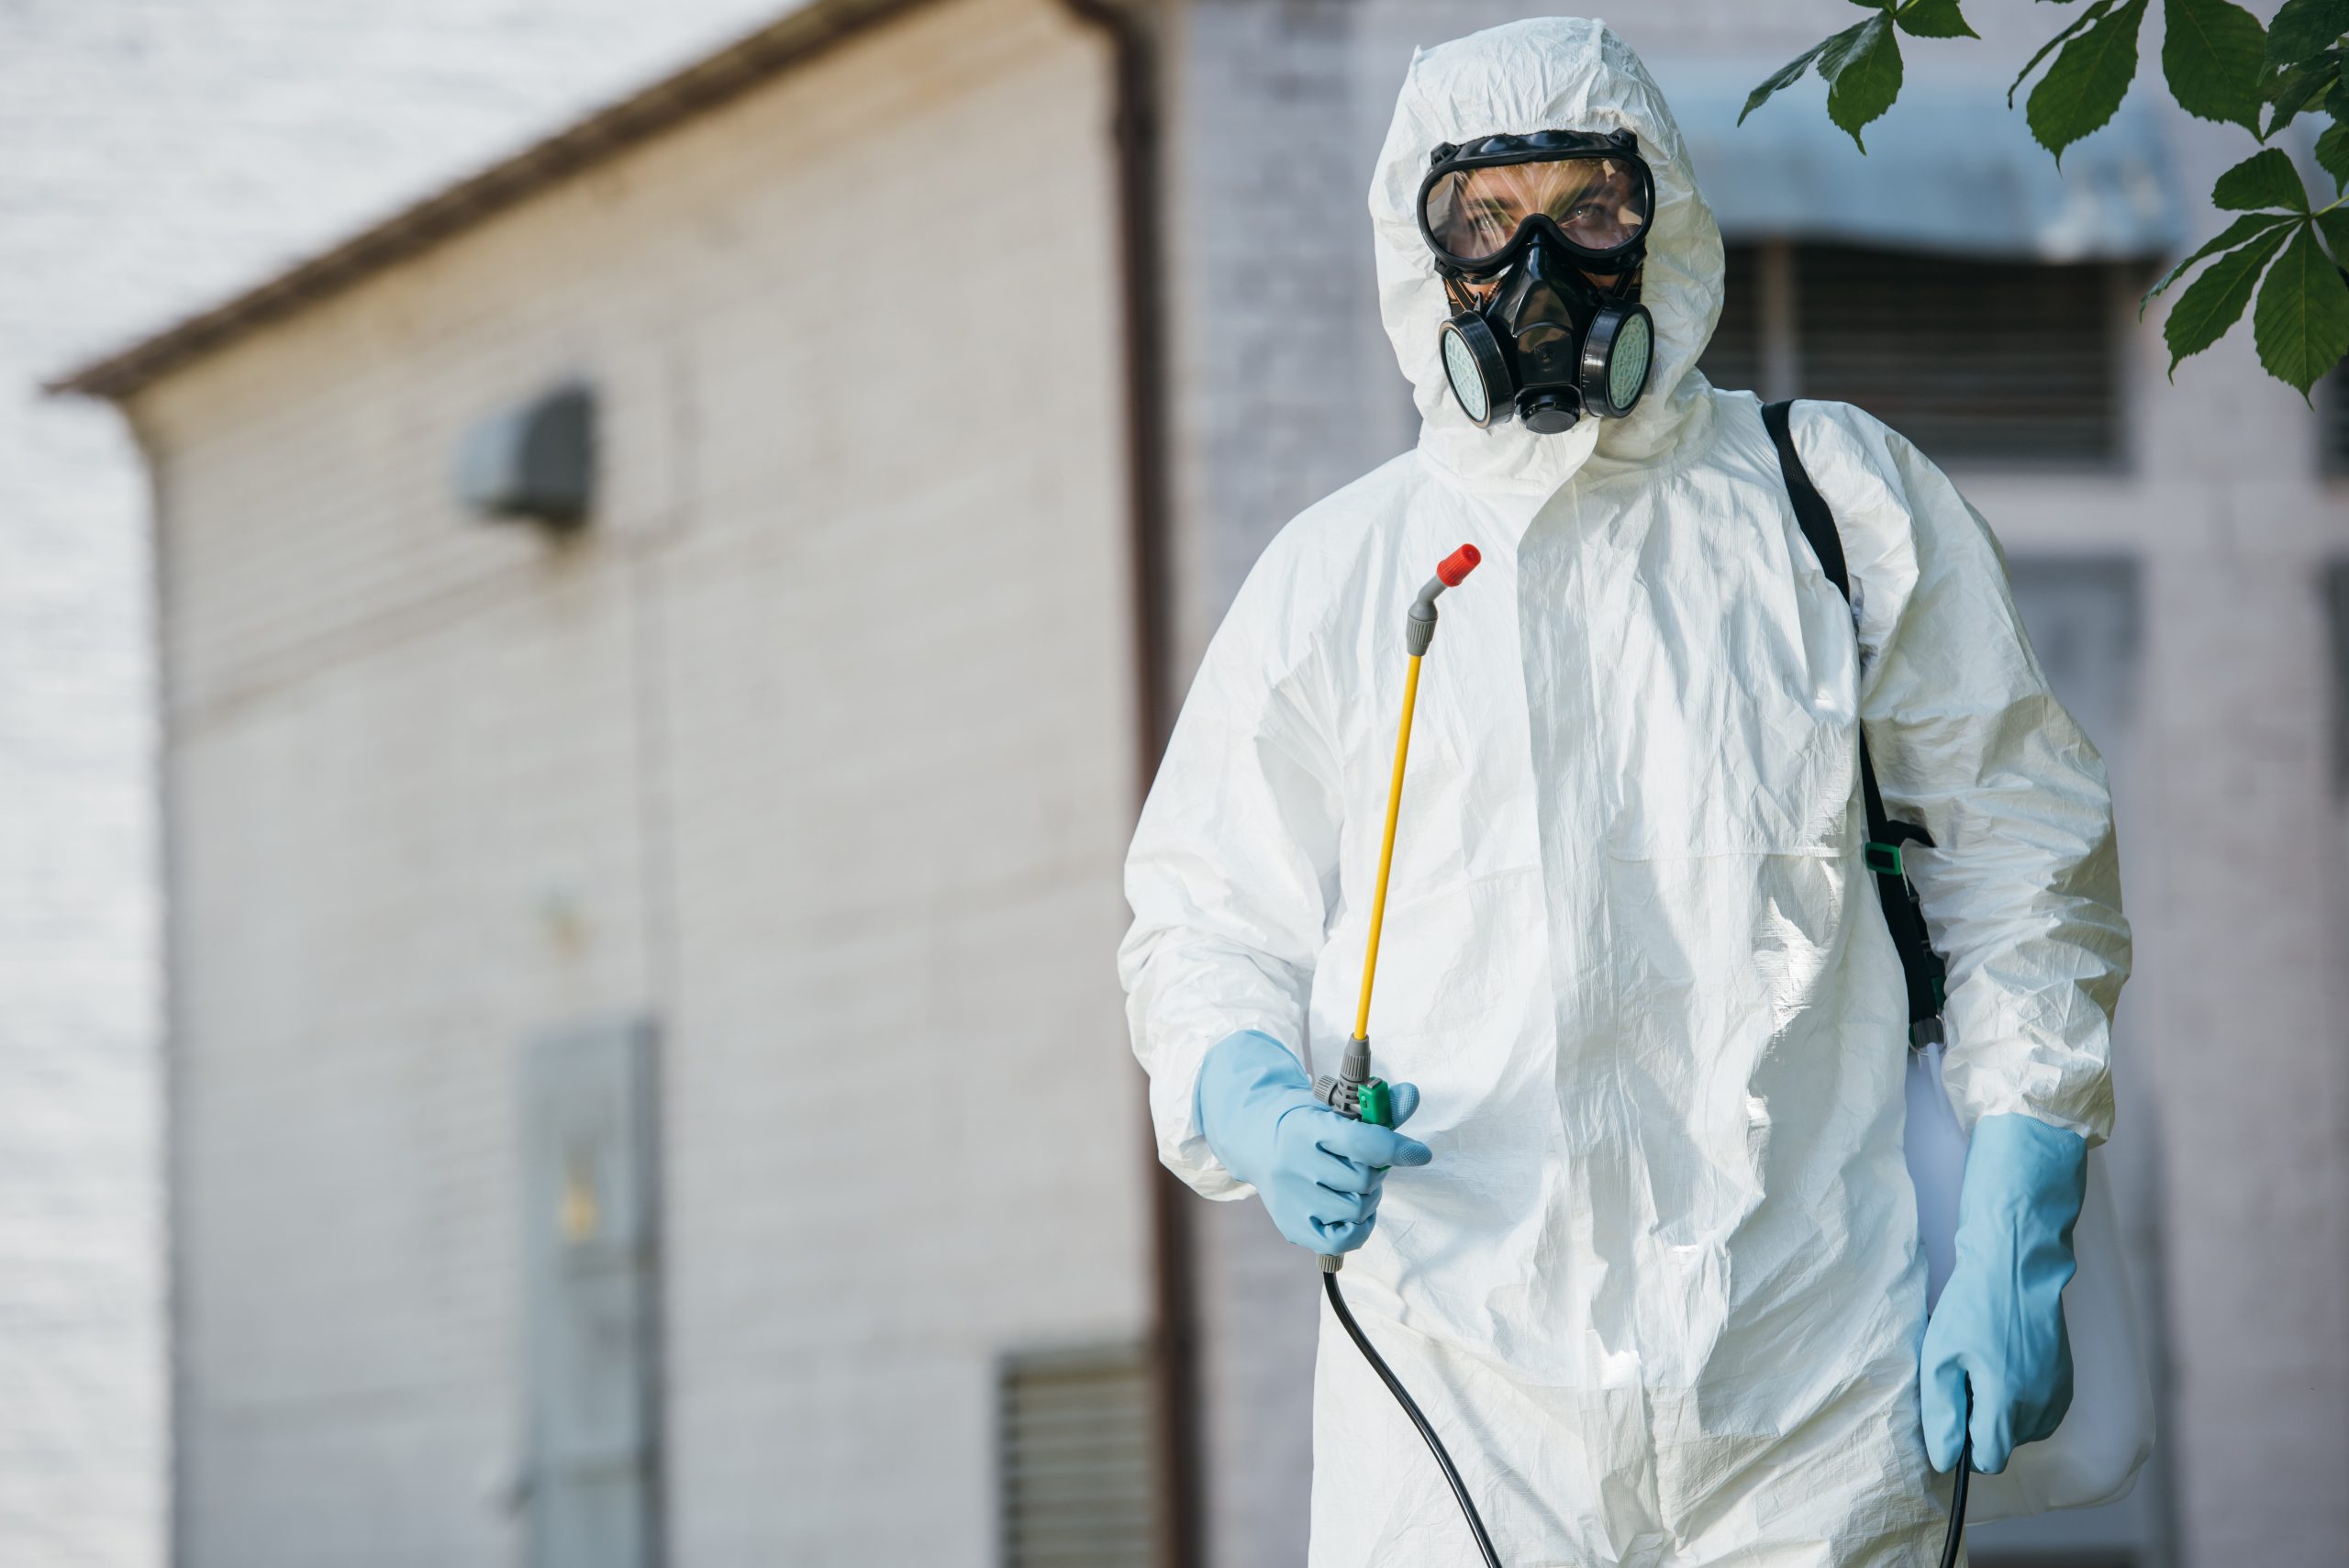 Pest control worker in protective suit with respirator